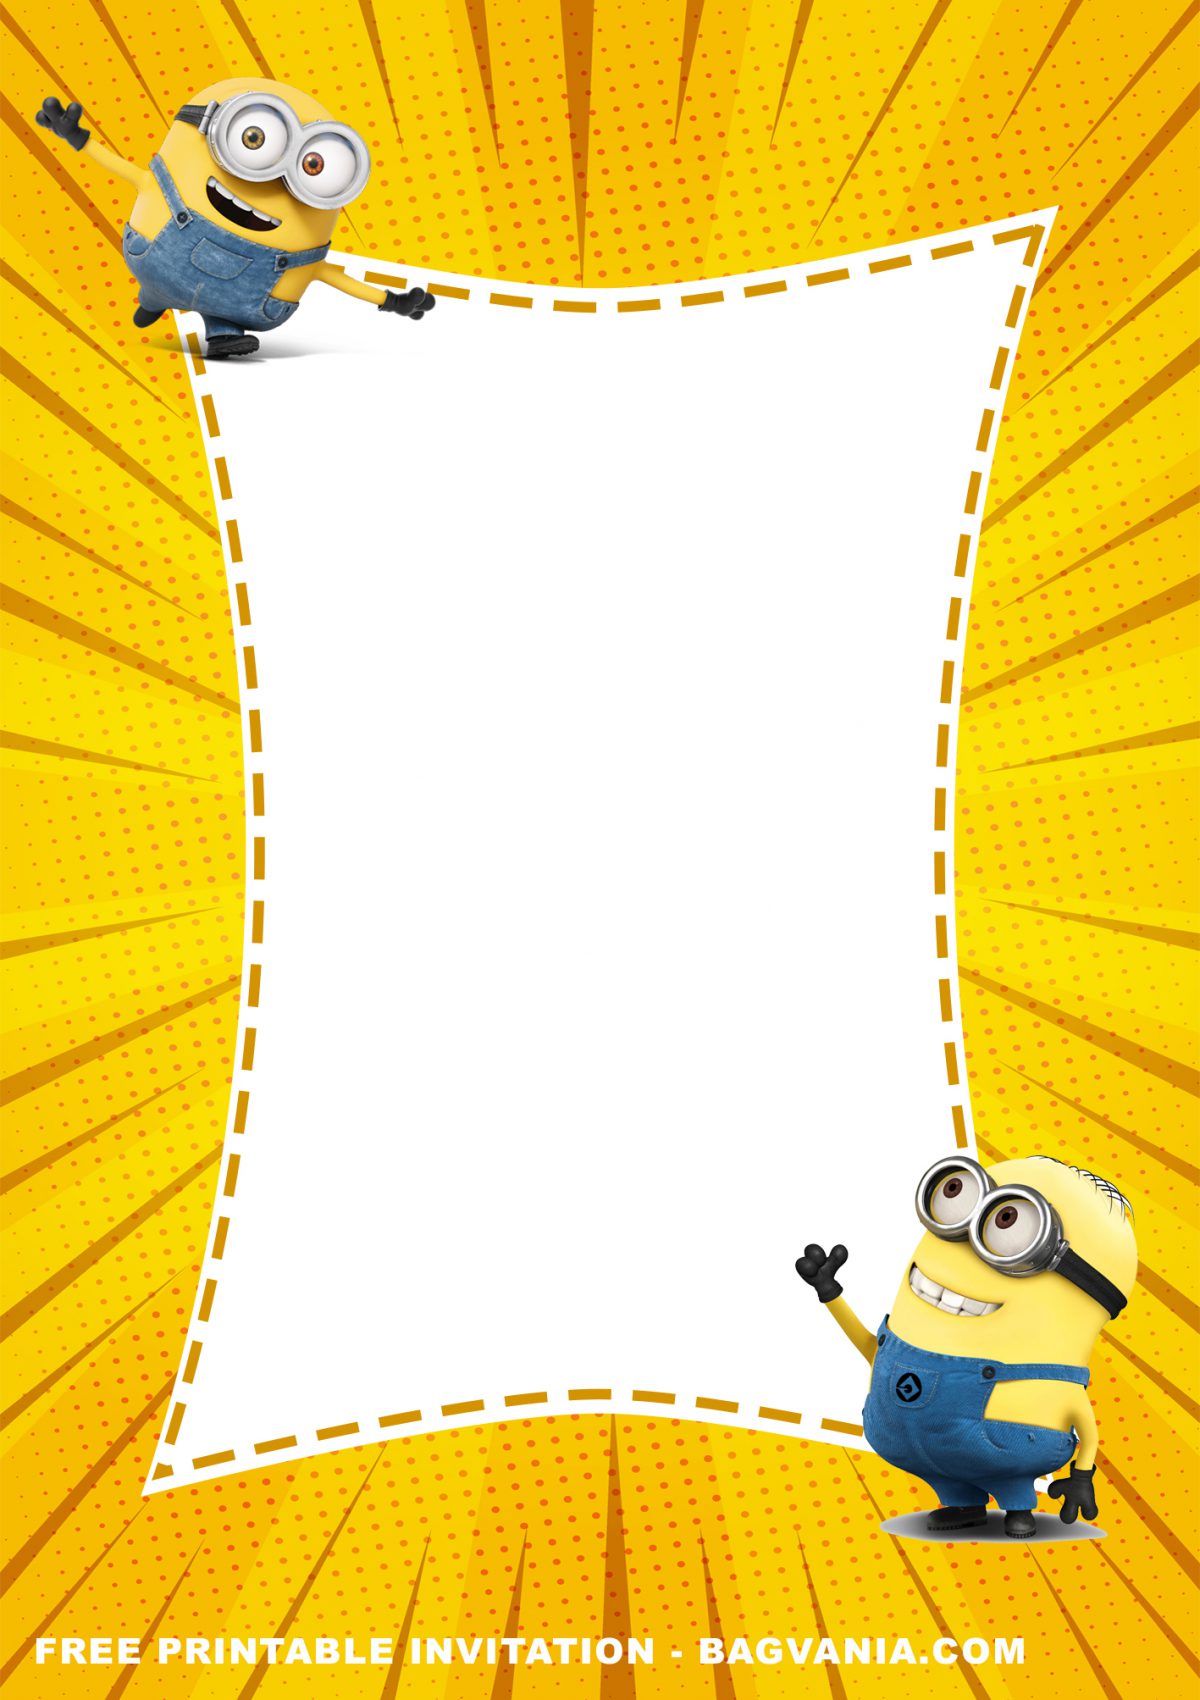 Free Printable Minion Birthday Invitation Templates With Yellow Background and Pattern